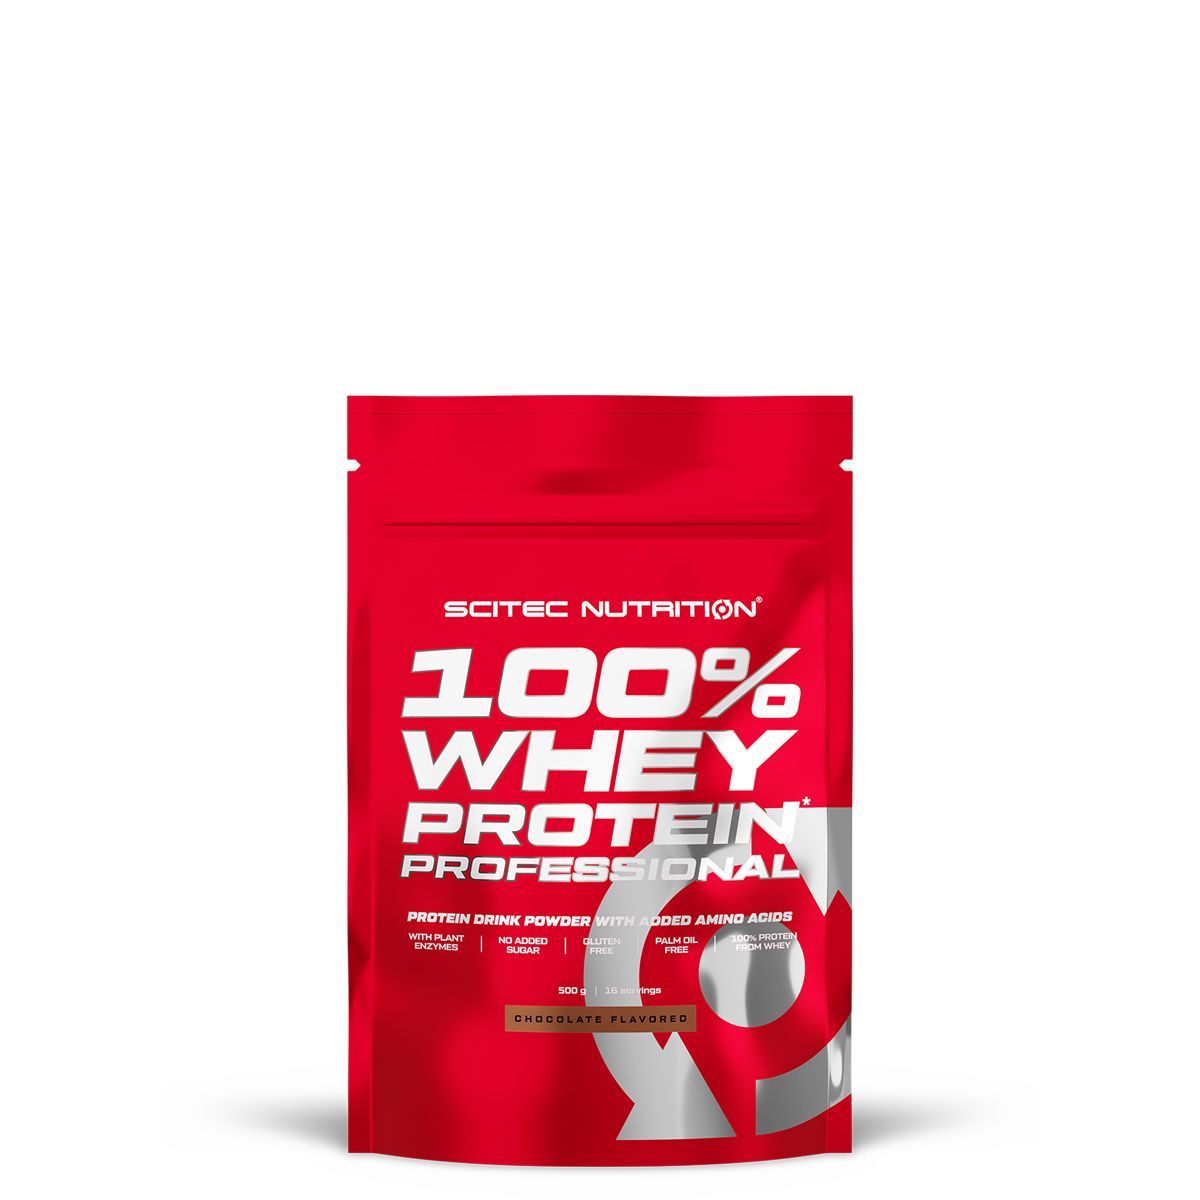 Scitec Nutrition - 100% Whey Protein Professional - 0.5kg